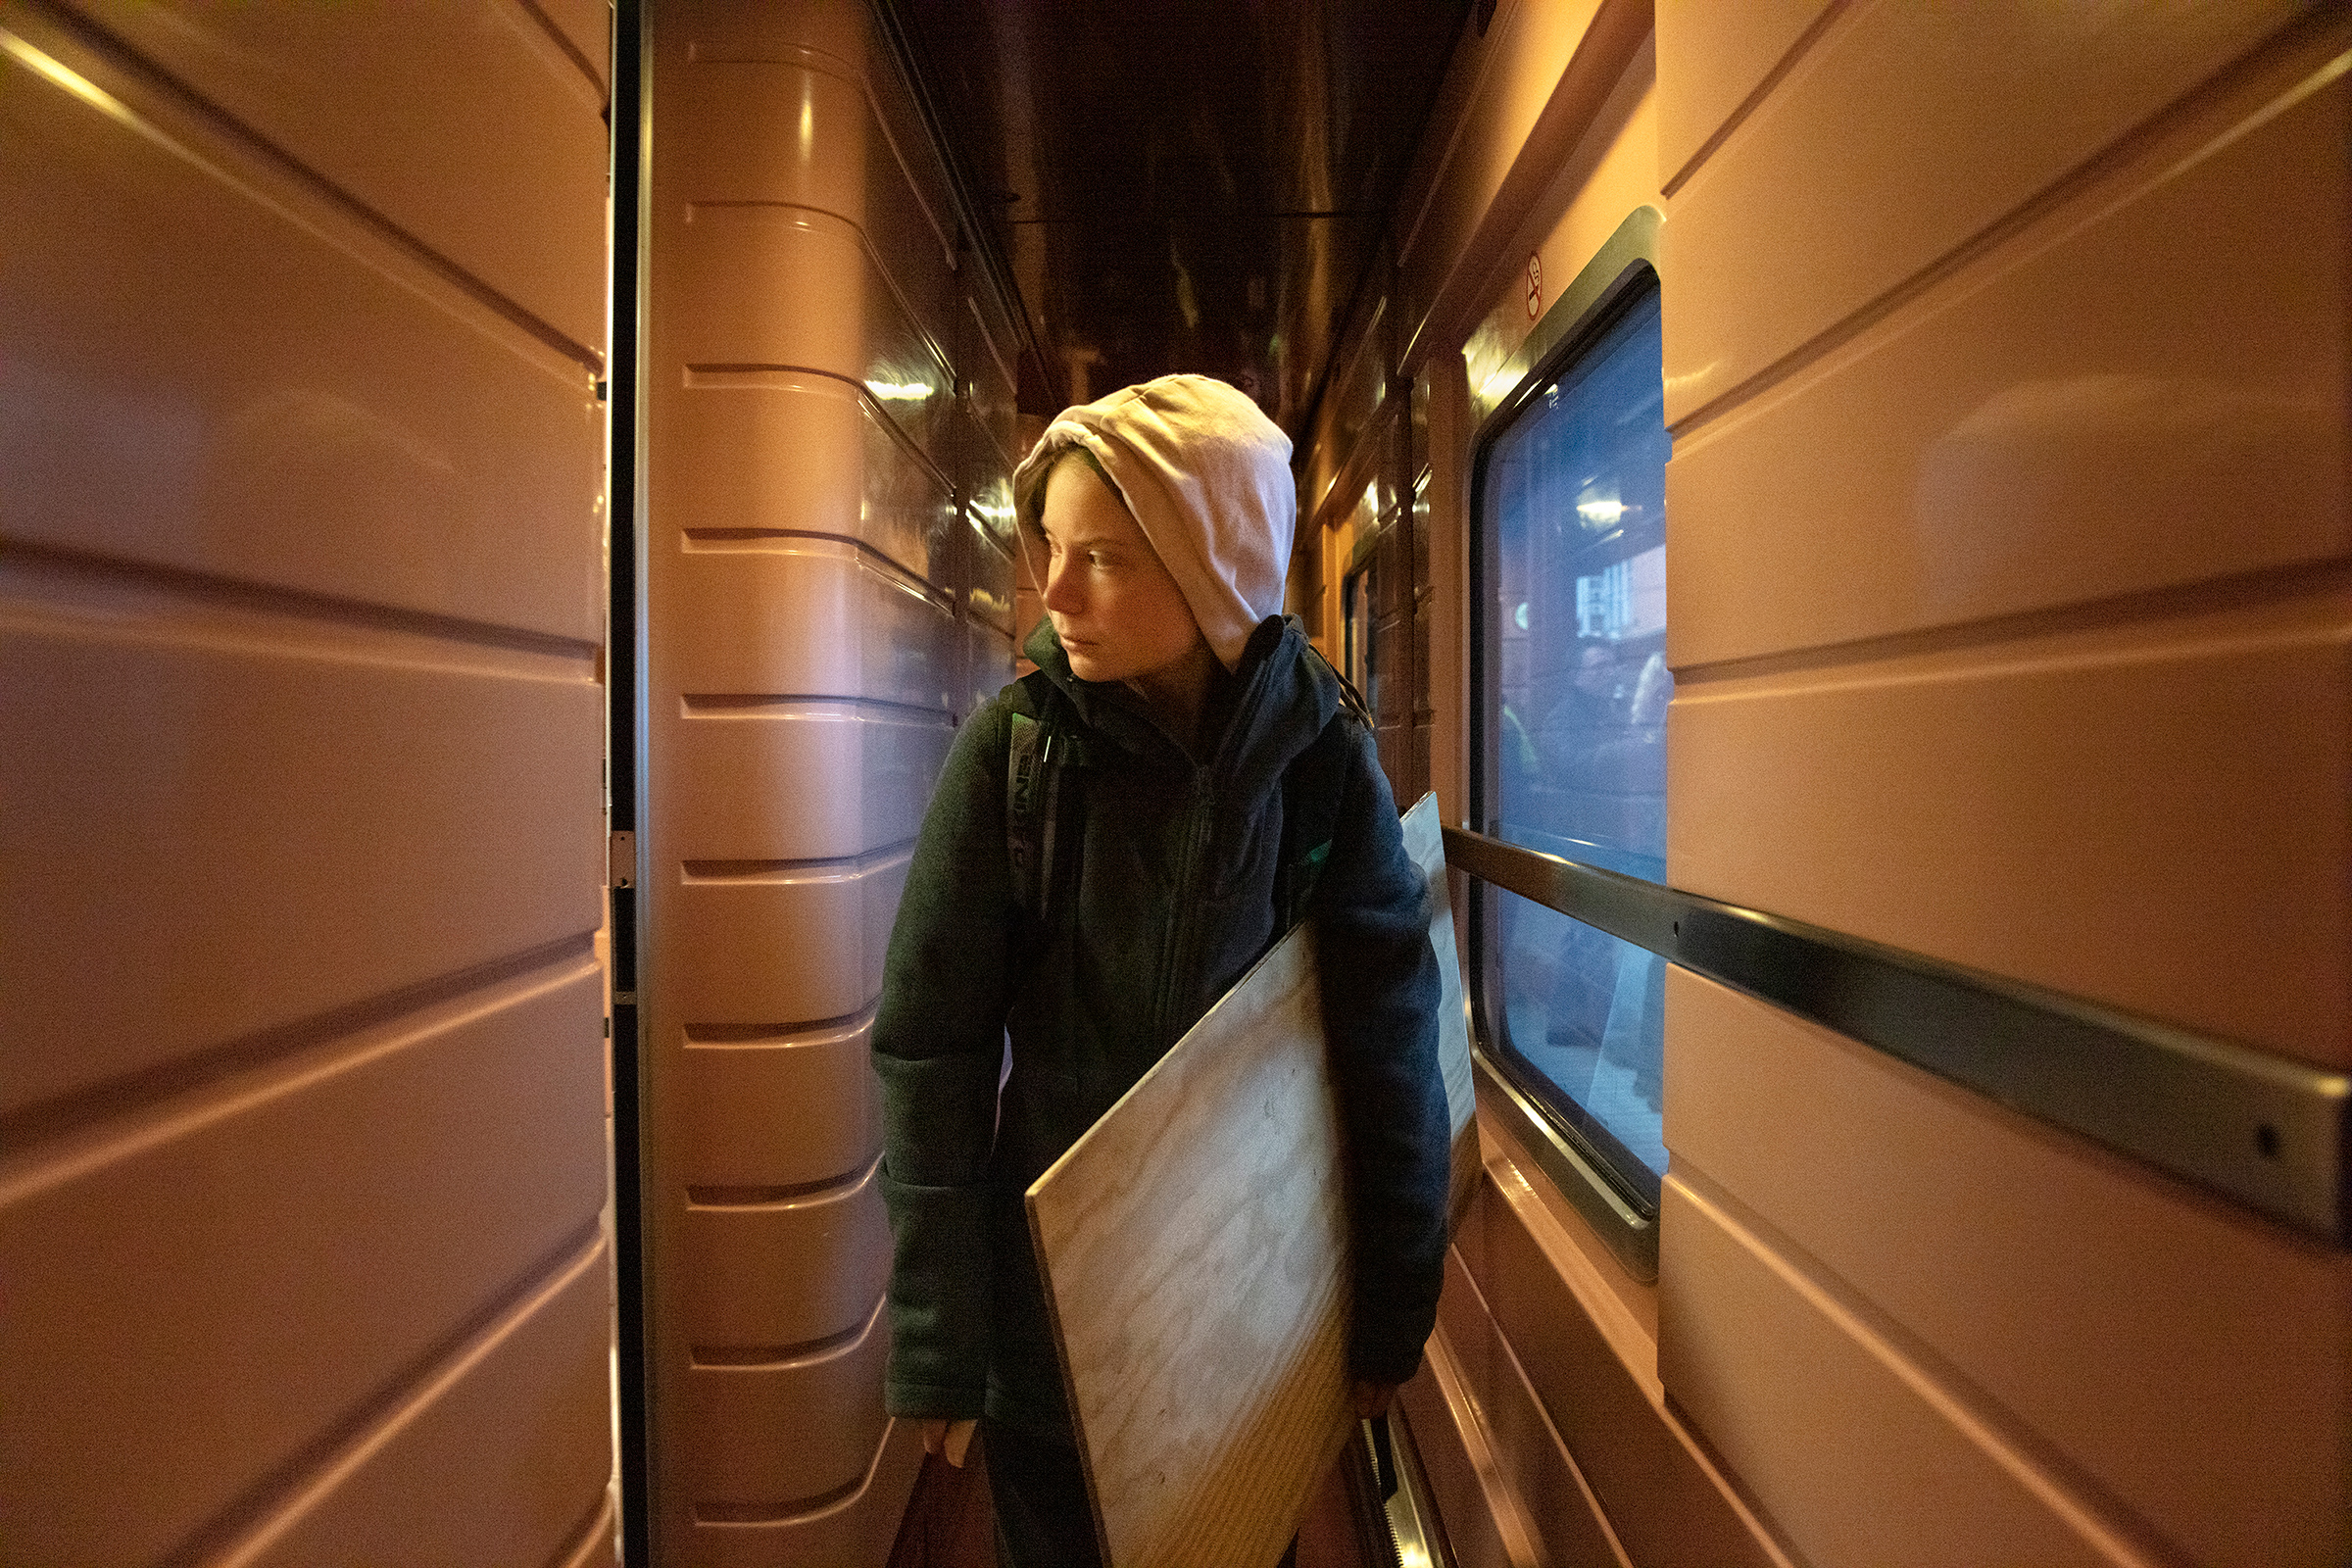 Thunberg arrives in Madrid for the last U.N. climate summit before a crucial deadline in 2020 (Evgenia Arbugaeva for TIME)